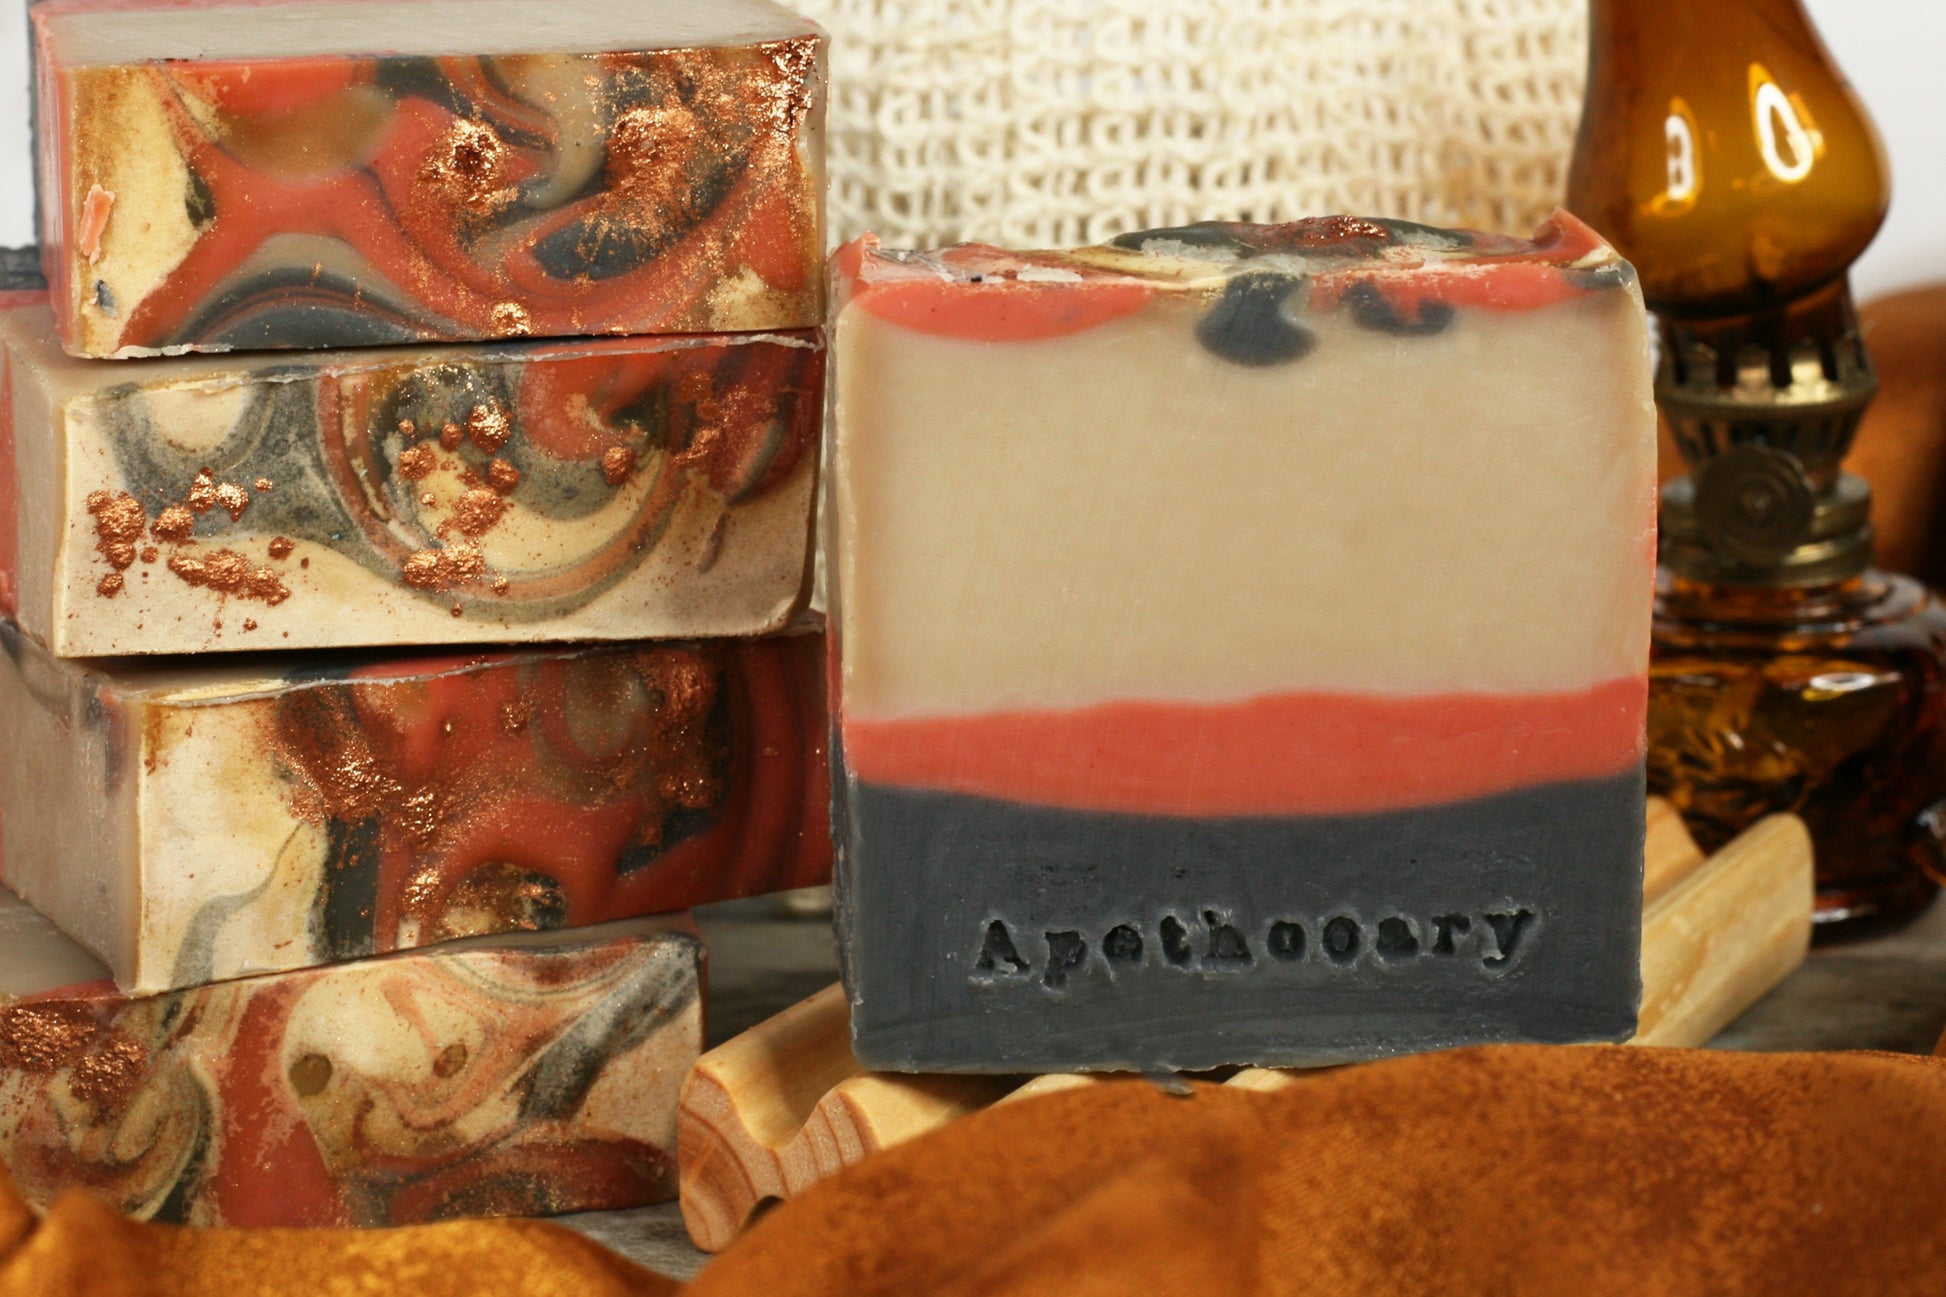 Black, red, and beige layers make this sensual, musky soap vivid and fiery. The top has black, red, and sparkling copper swirls